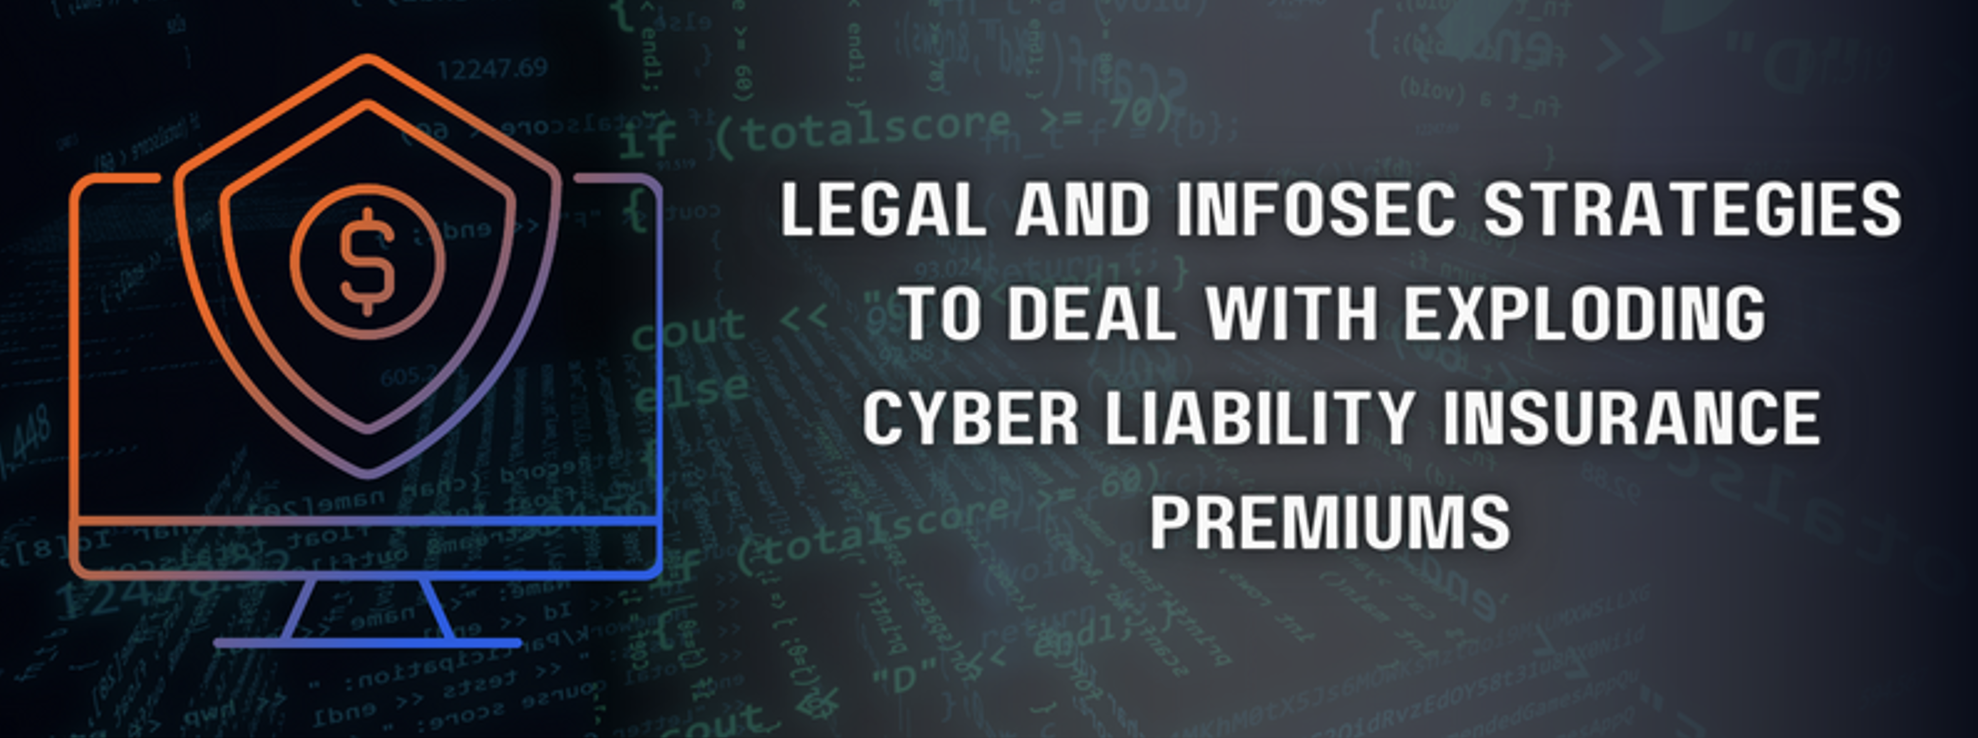 Legal and Infosec Strategies to Deal with Exploding Cyber Liability Insurance Premiums